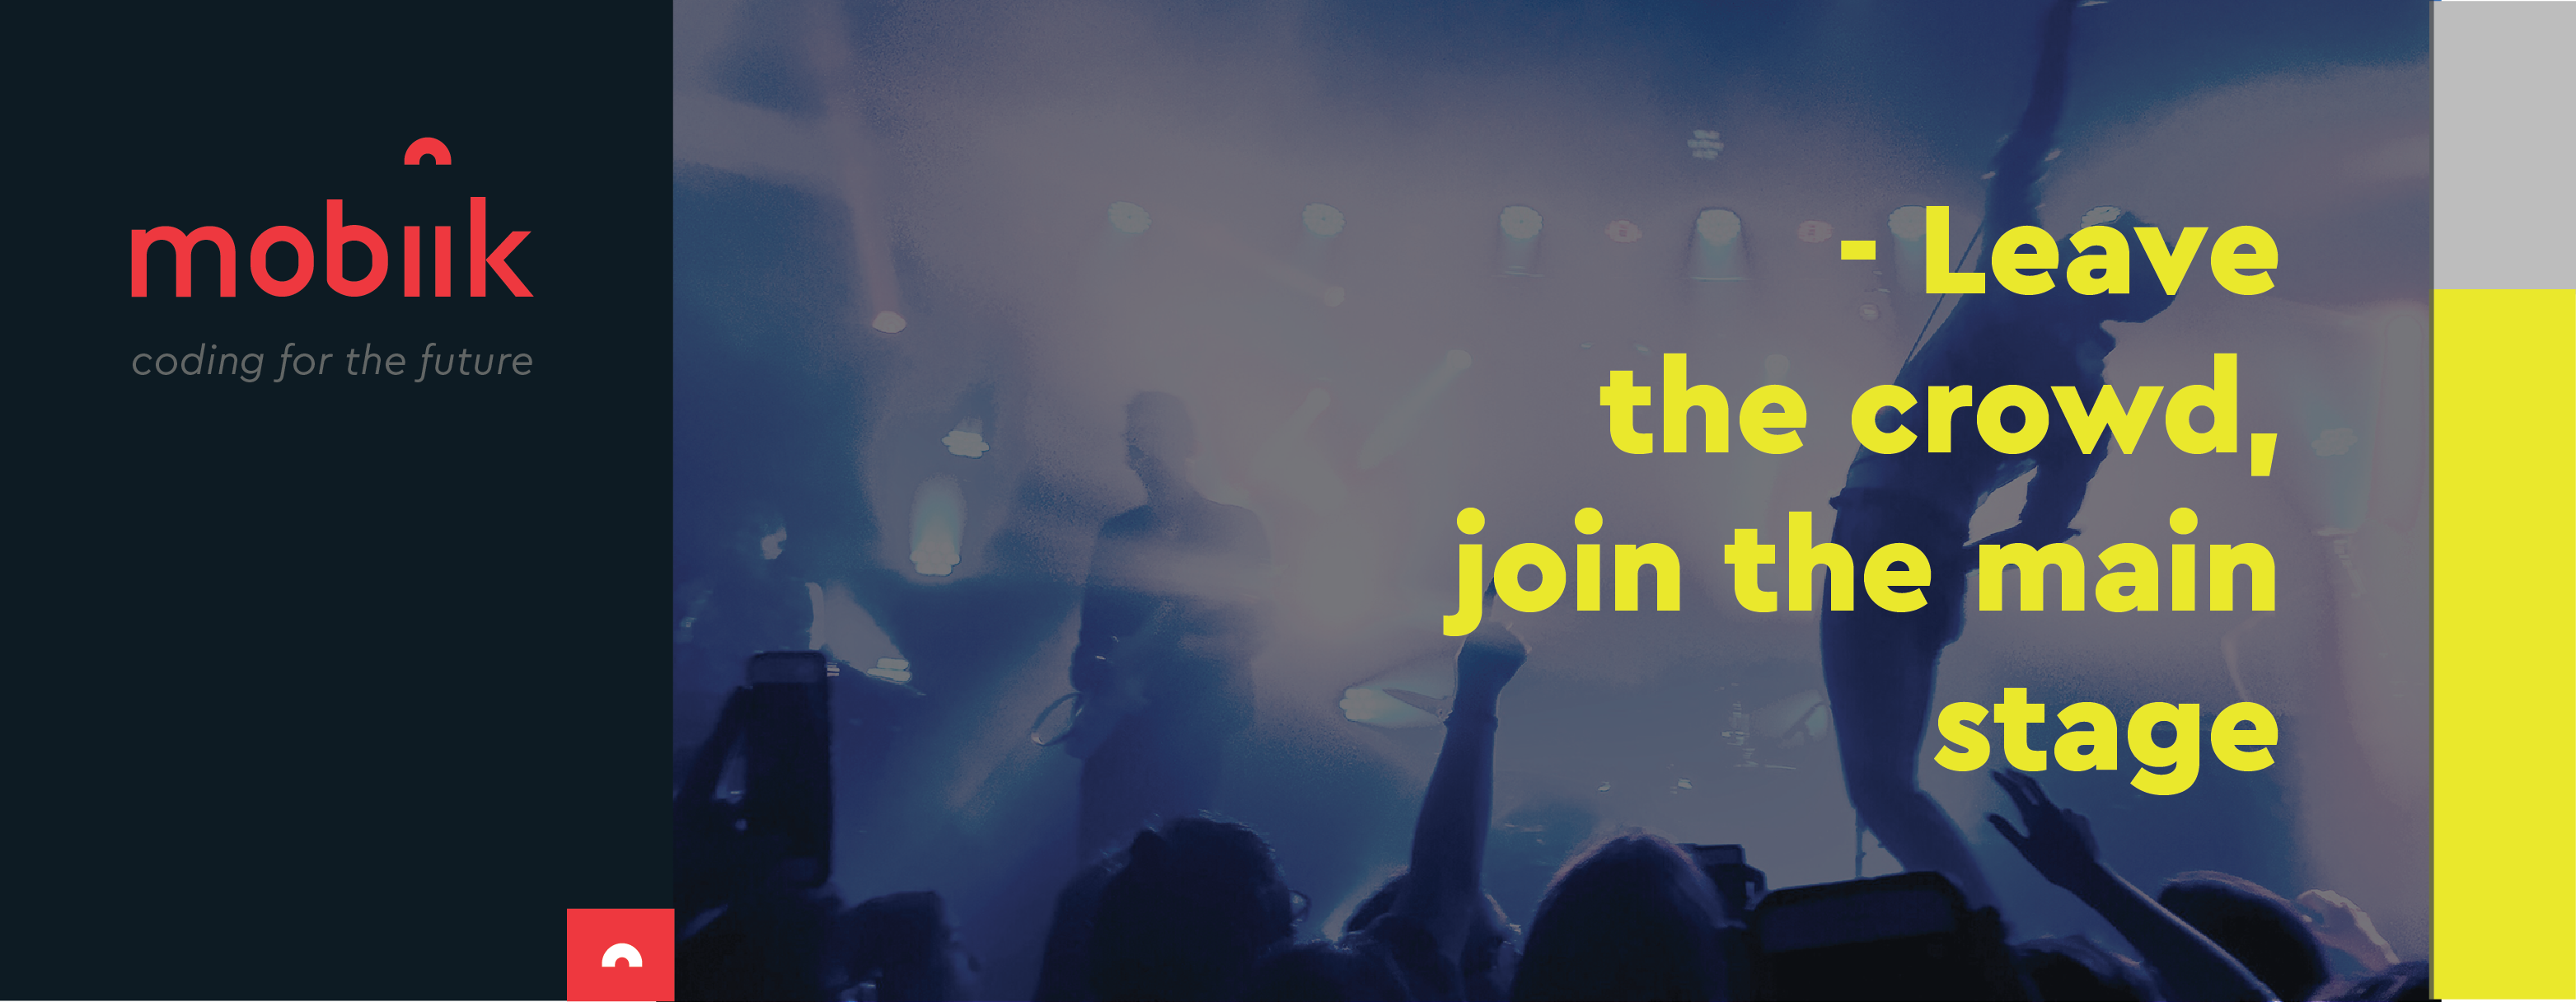 mobiik-leave the crowd, join the main stage